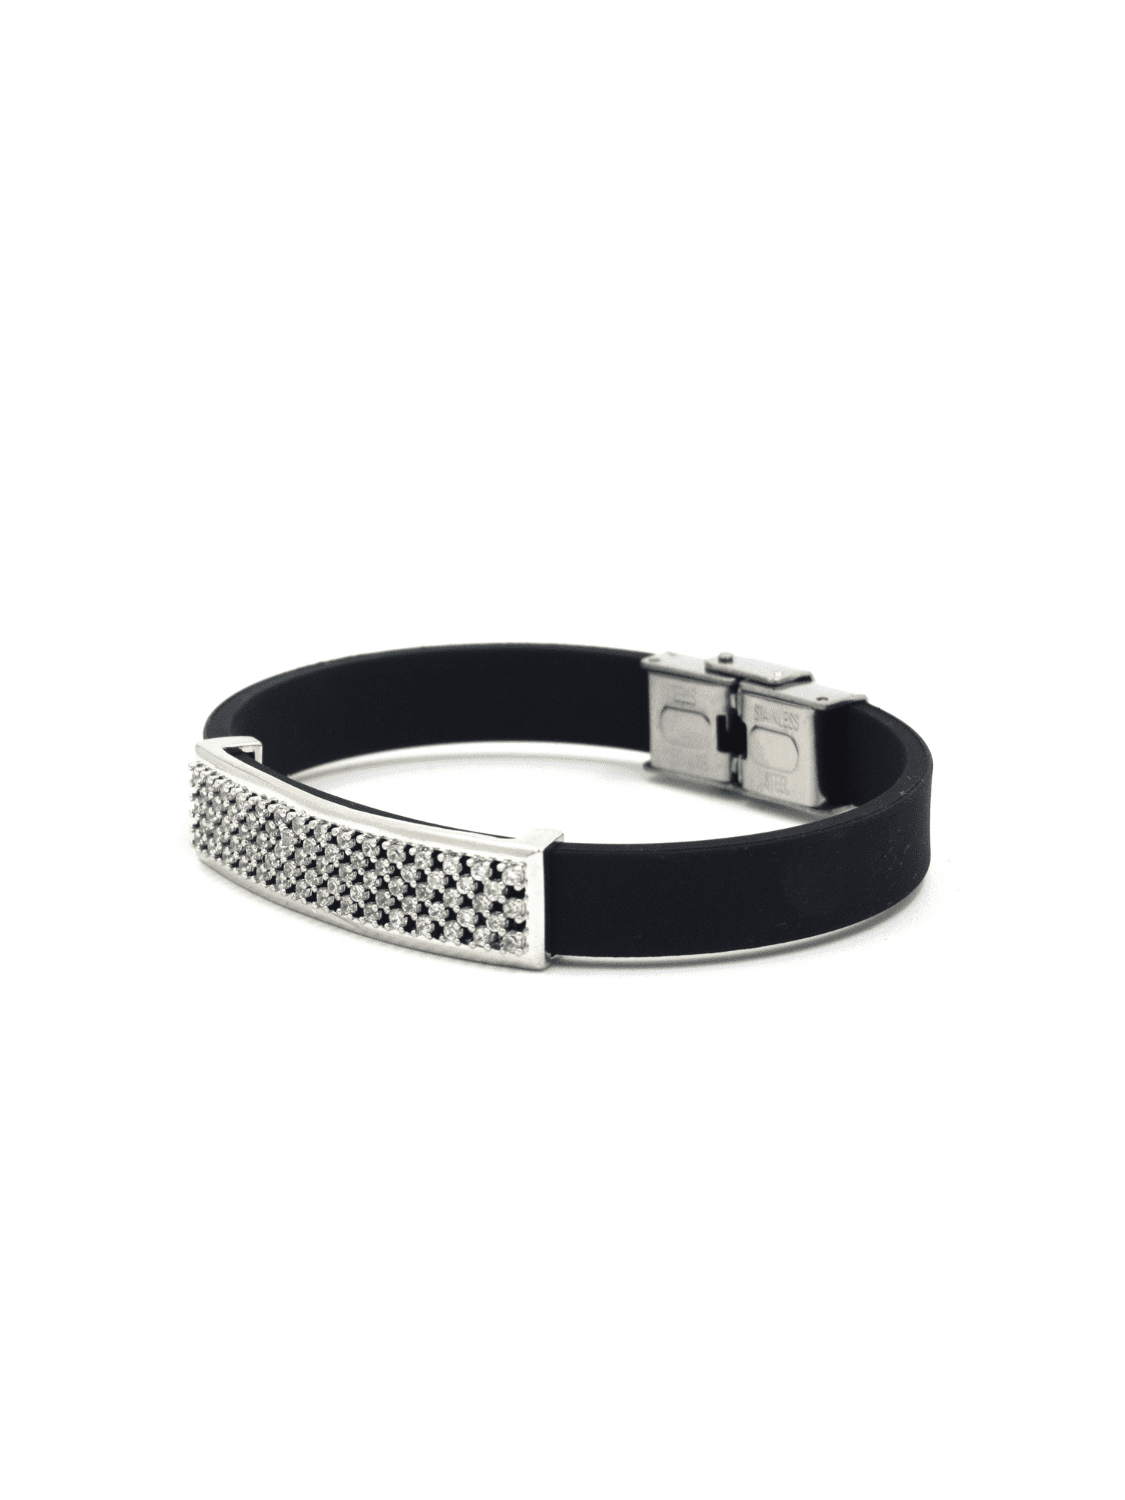 Onyx and Silver Toned Bracelet - QUEENS JEWELS